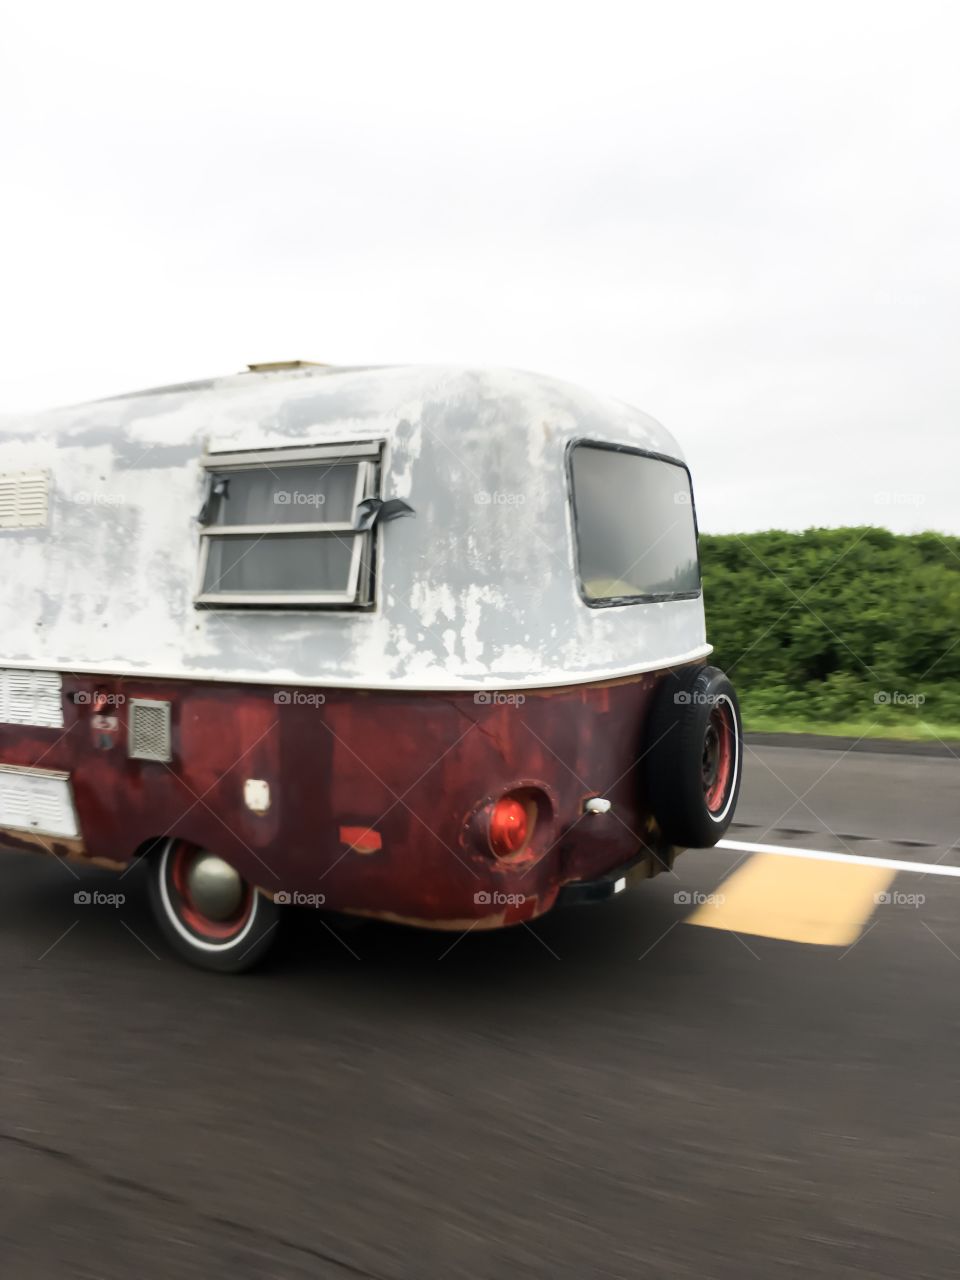 Vintage Red and white trailer camper conceptual fun travel road trip photography driving on highway 